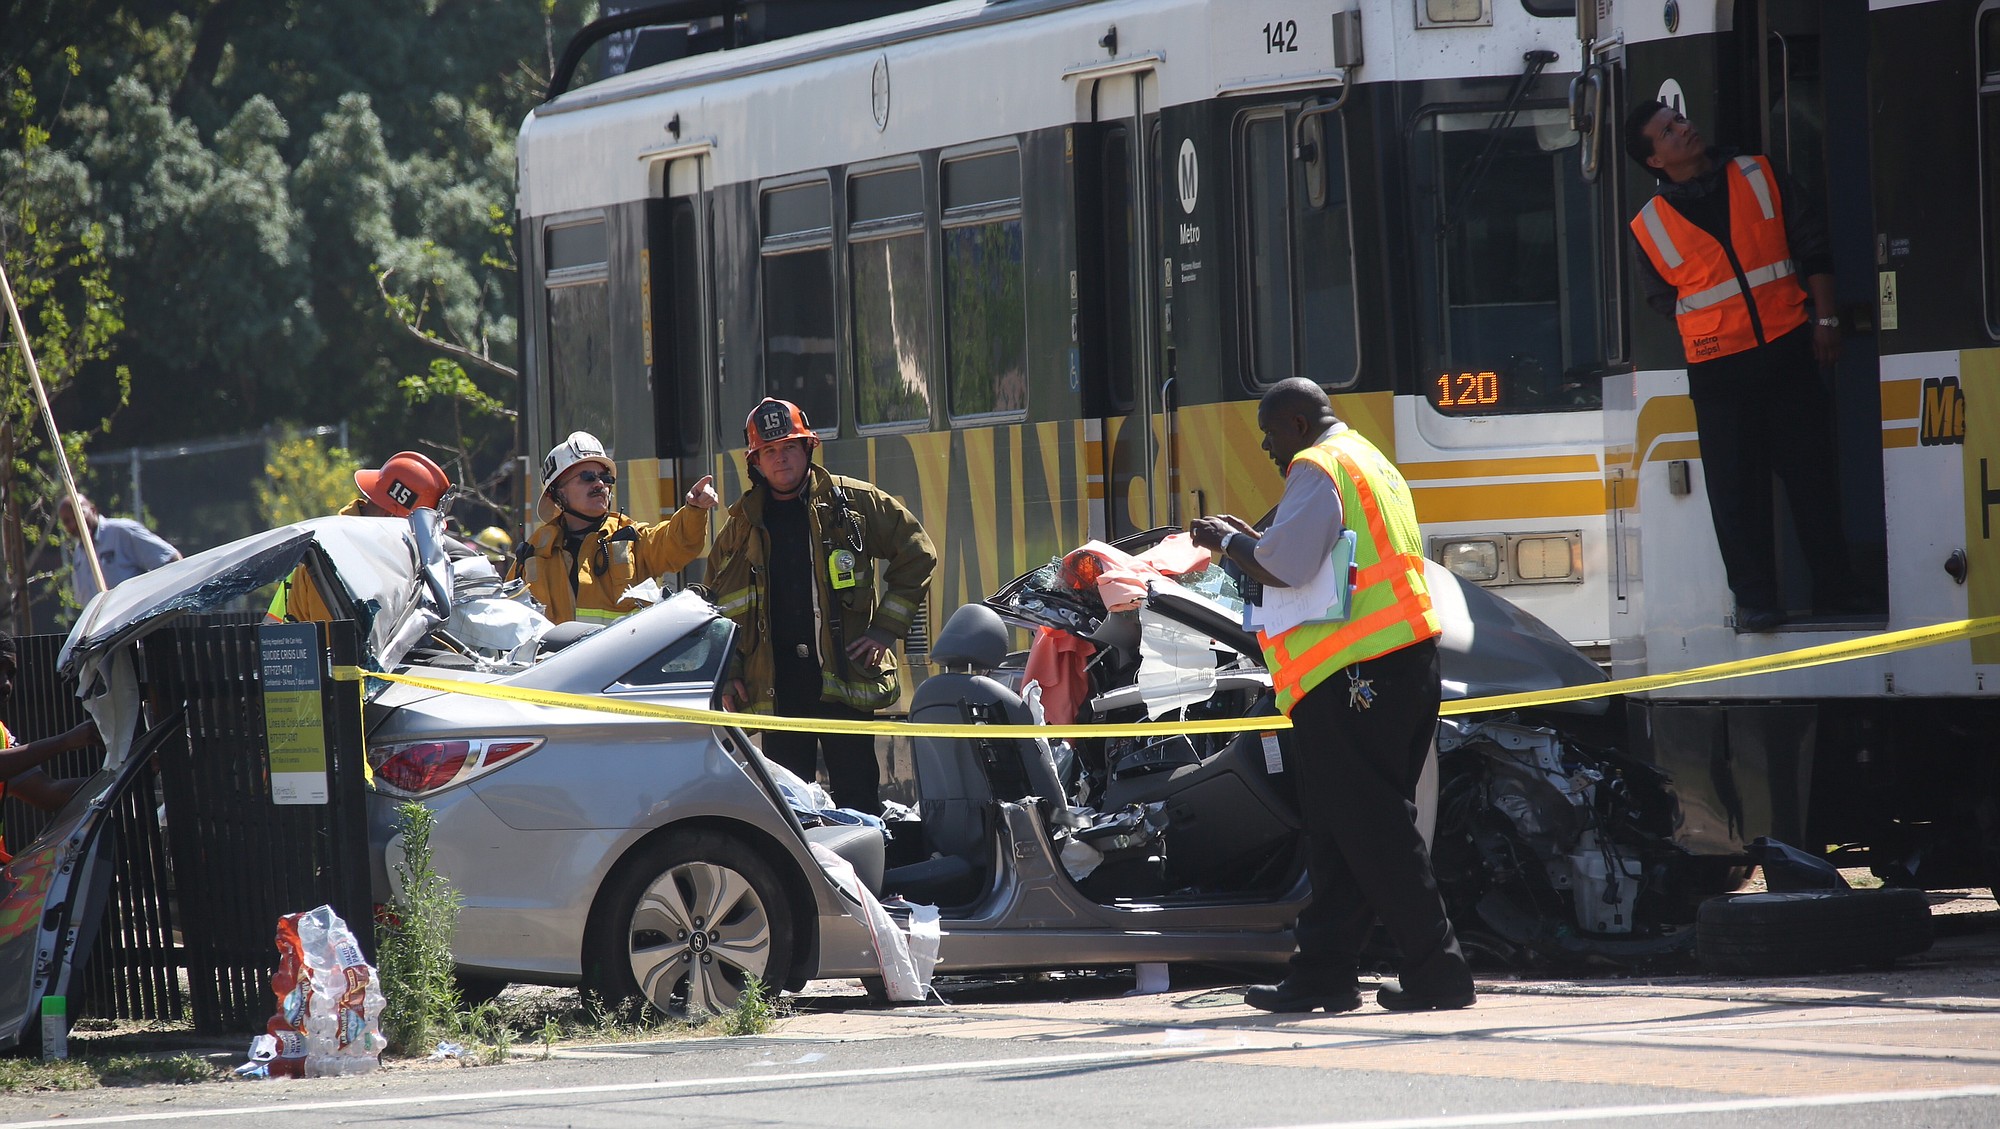 Emergency personnel work at the site of a collision between and Expo Line commuter train and a vehicle near downtown Los Angeles on Saturday, March 28, 2015.